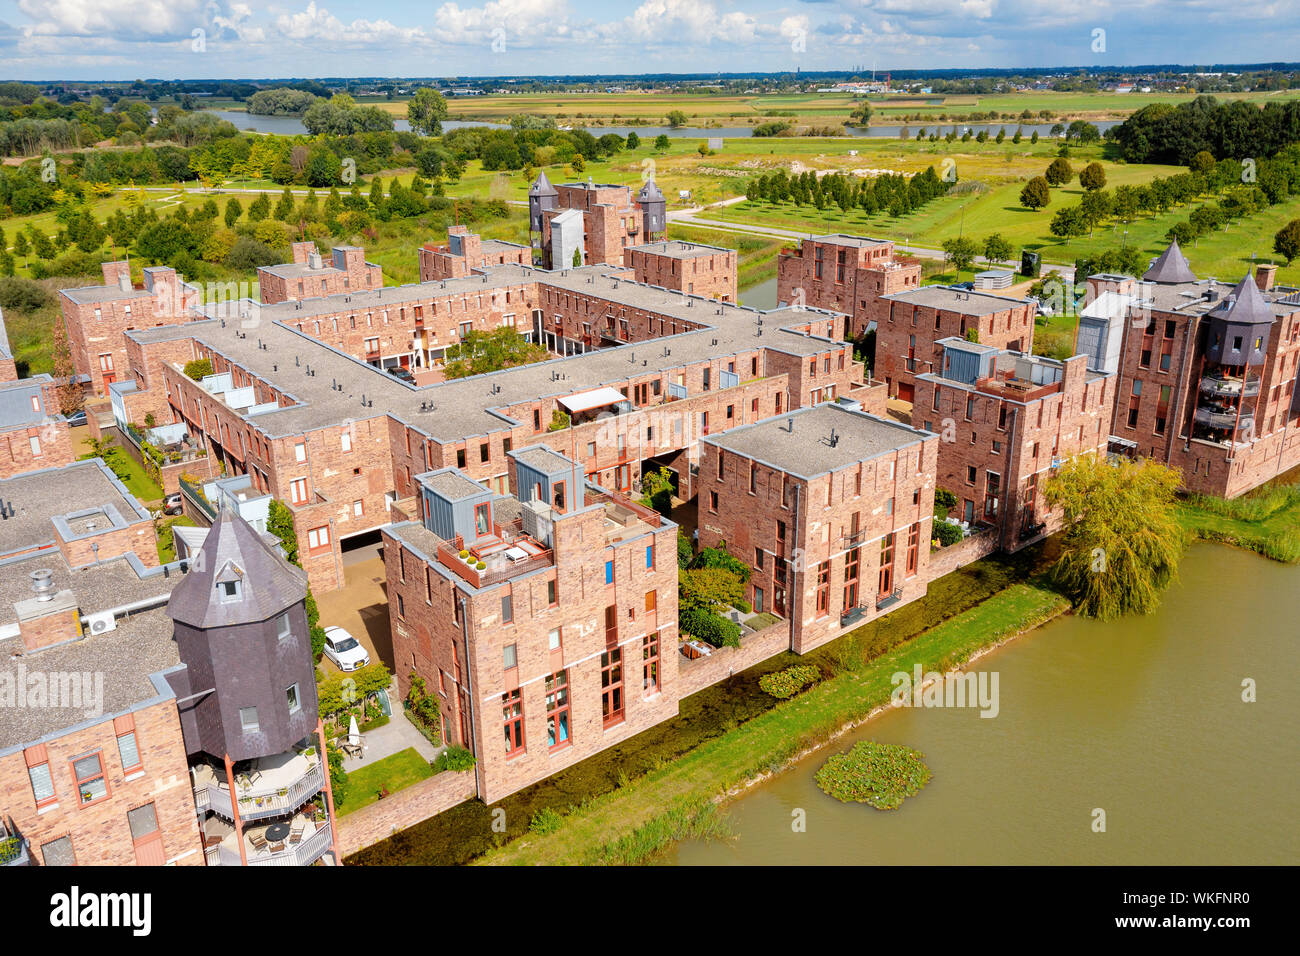 The special architecture of the castle houses in Den Bosch from the air Stock Photo